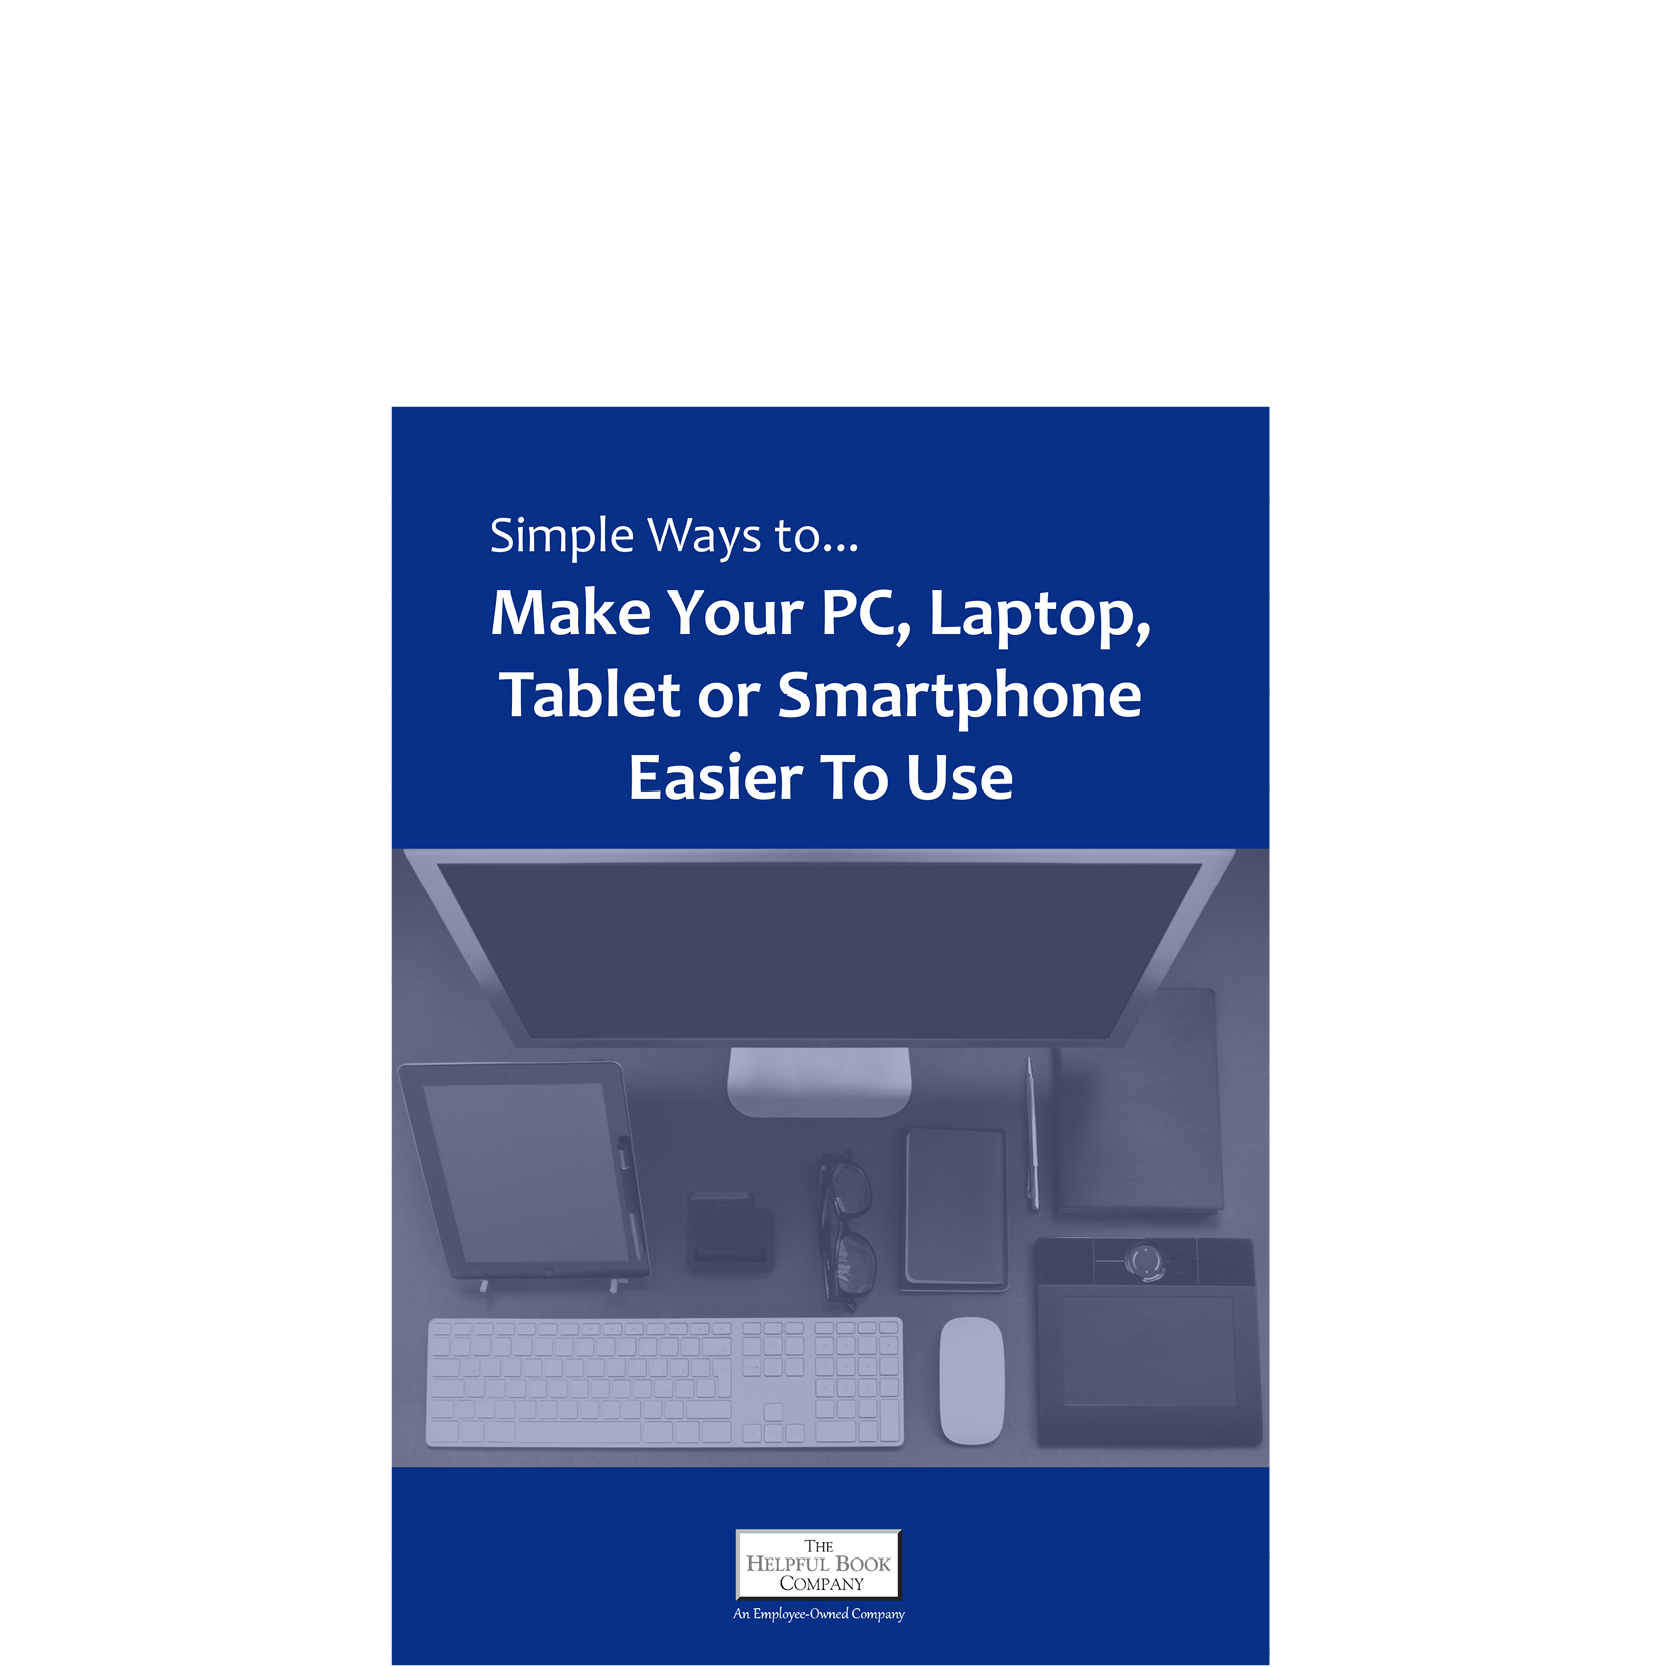 Simple ways to make your PC tablet or smartphone easier to use